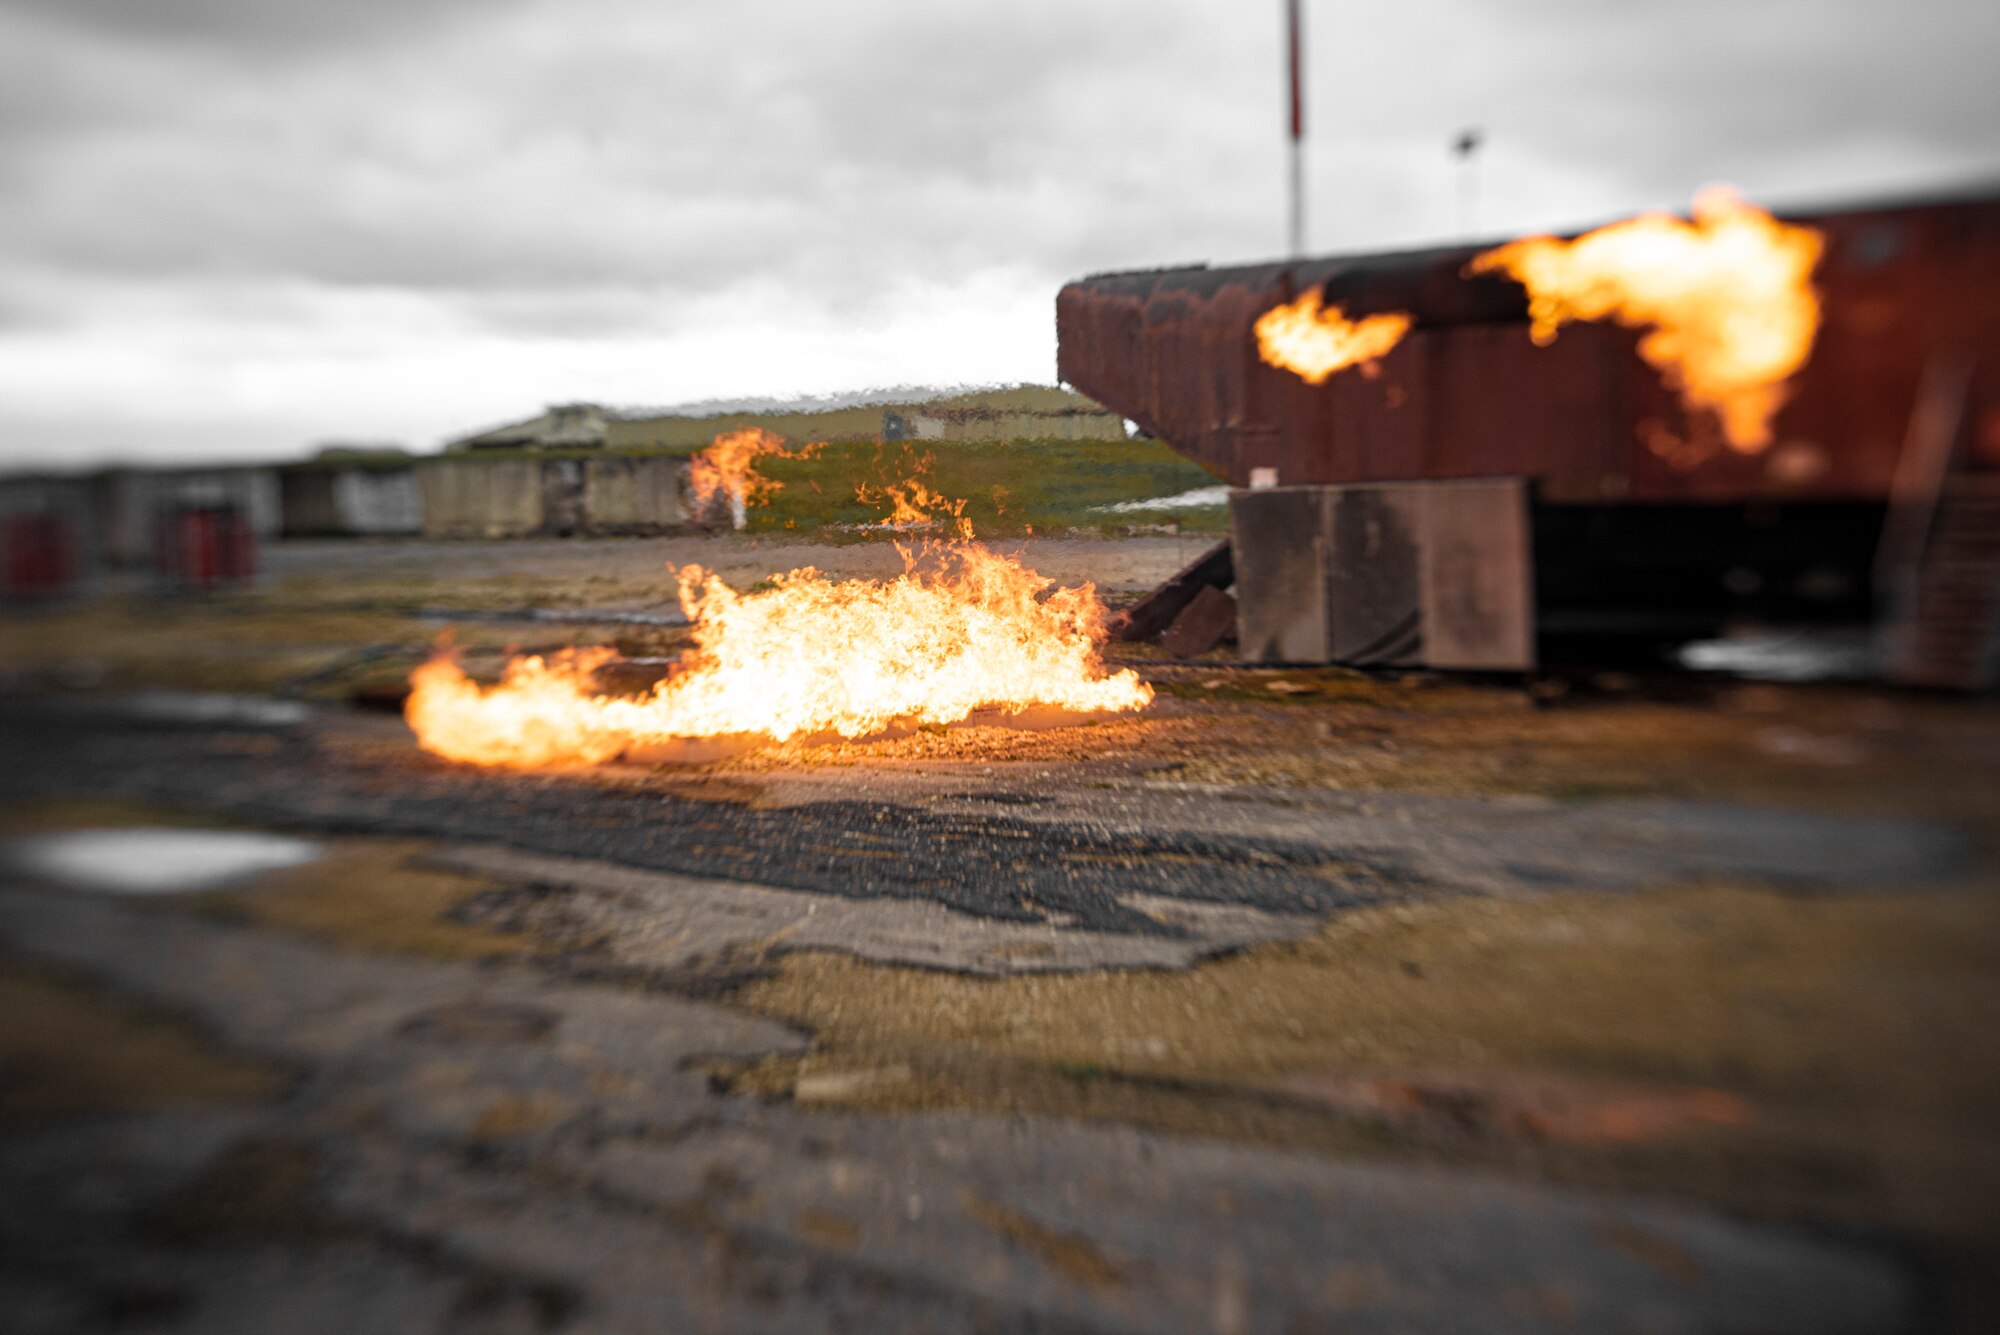 The 422d Fire Emergency Services ignites its mobile aircraft firefighting trainer in preparation for a training exercise at RAF Fairford, England, Oct. 23, 2020. The trainer allows firefighters to practice fighting fires both inside and outside an aircraft. (U.S. Air Force photo by Tech. Sgt. Aaron Thomasson)